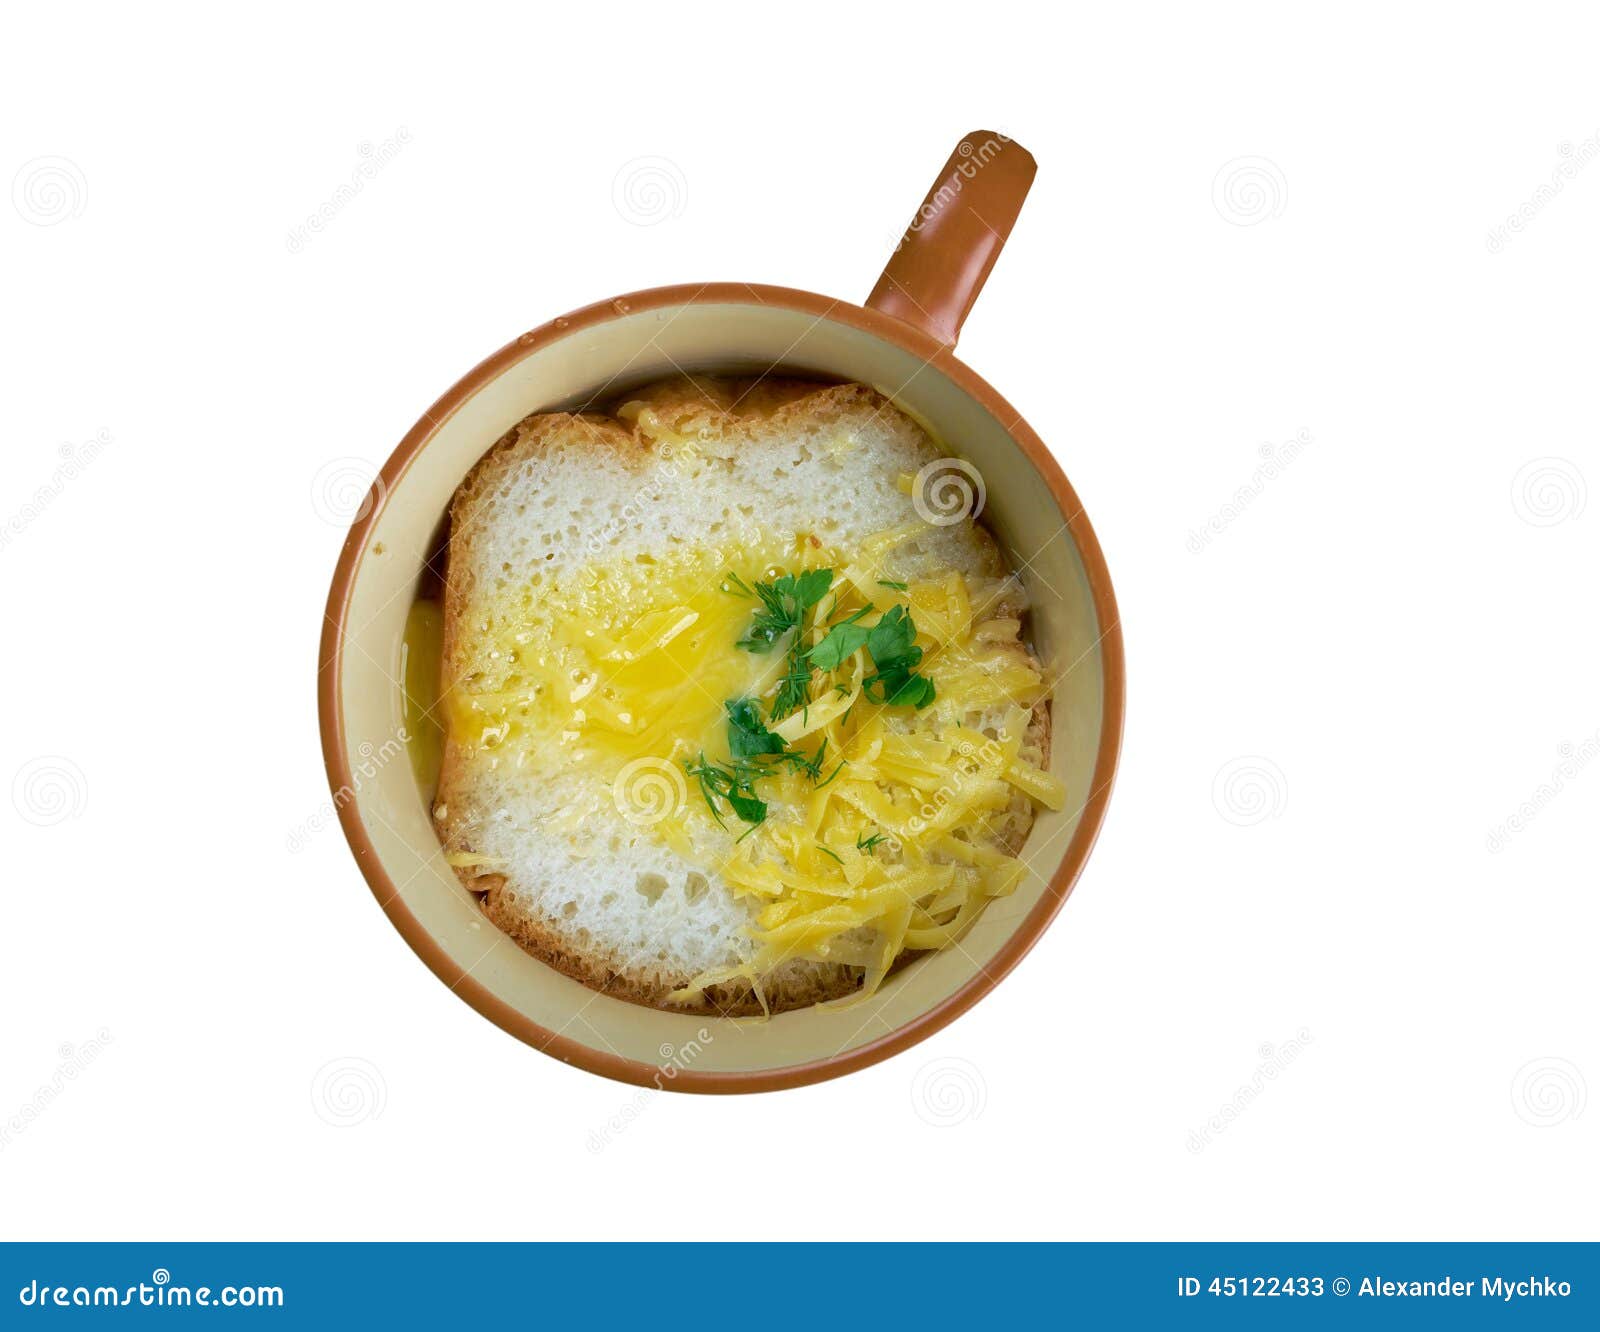 Zuppa pavese stock image. Image of italian, alla, soup - 45122433